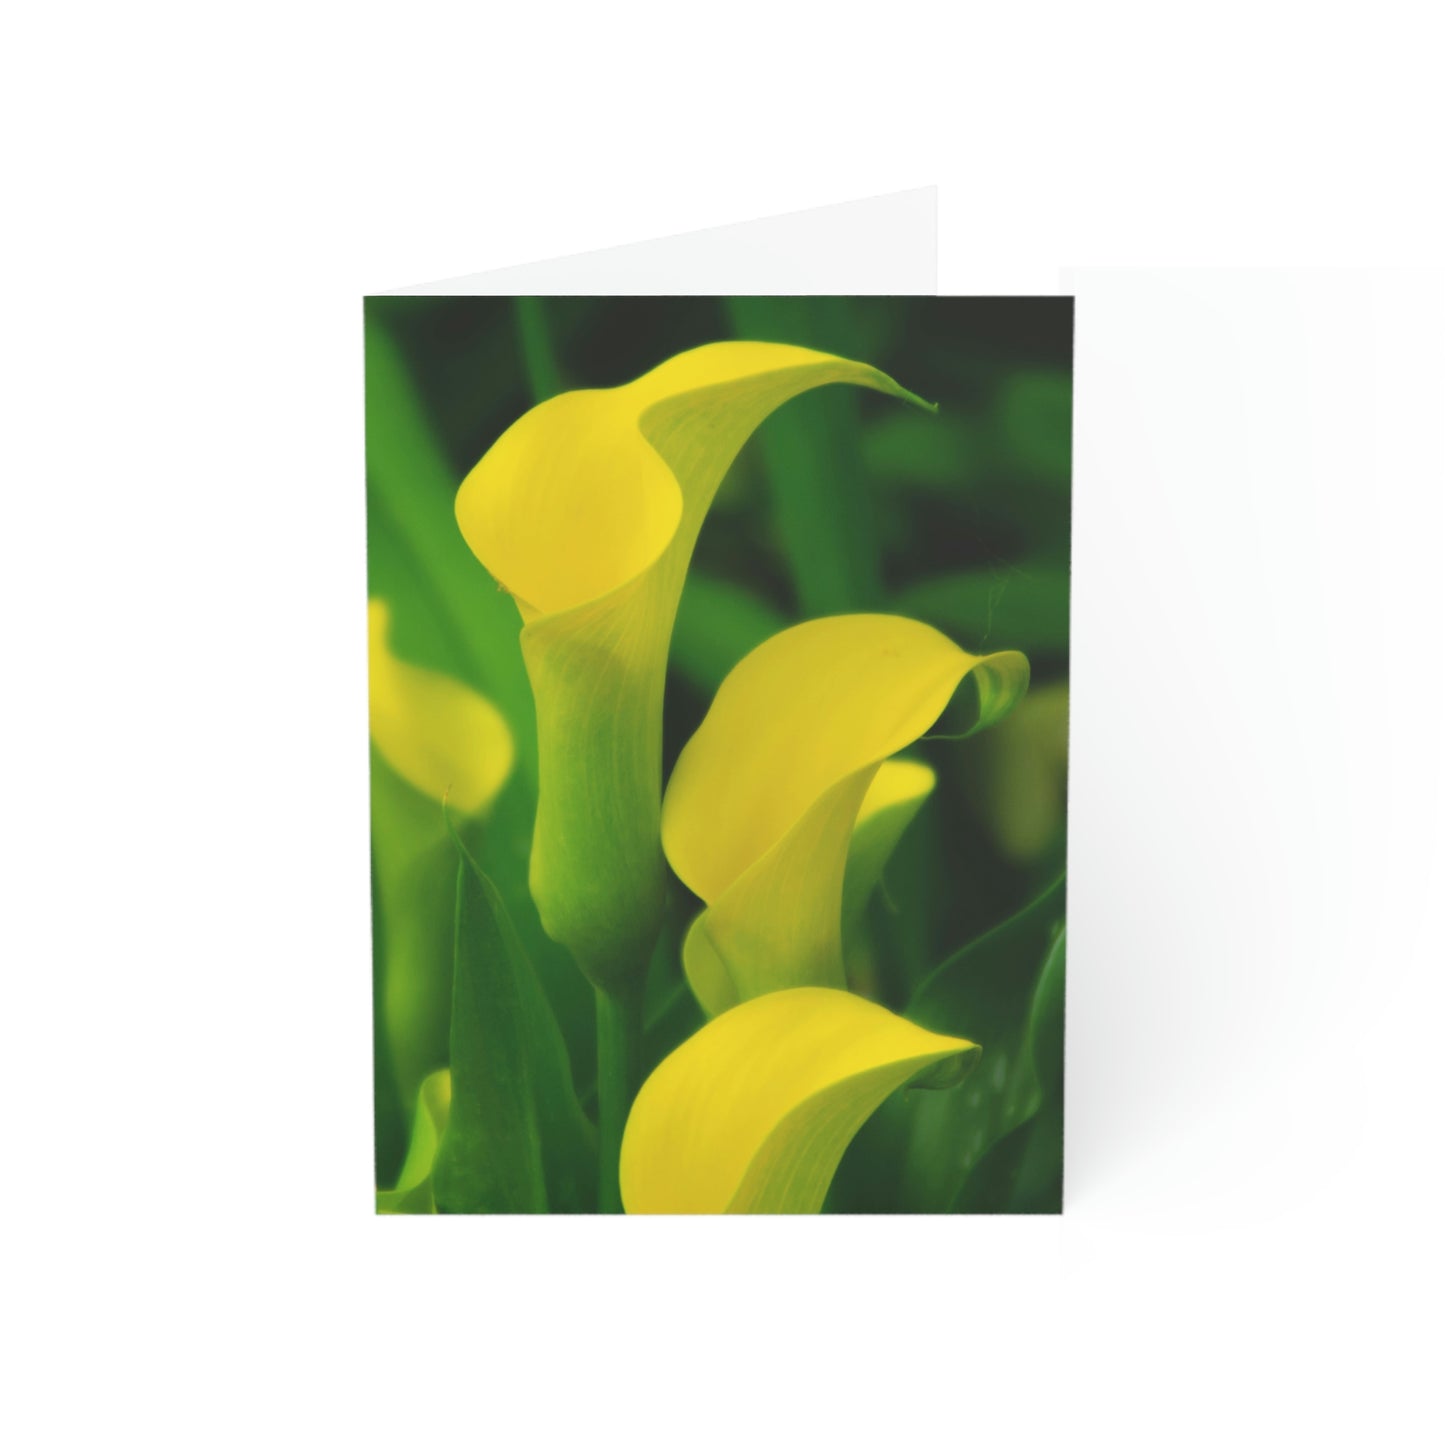 Flowers 33 Greeting Cards (1, 10, 30, and 50pcs)